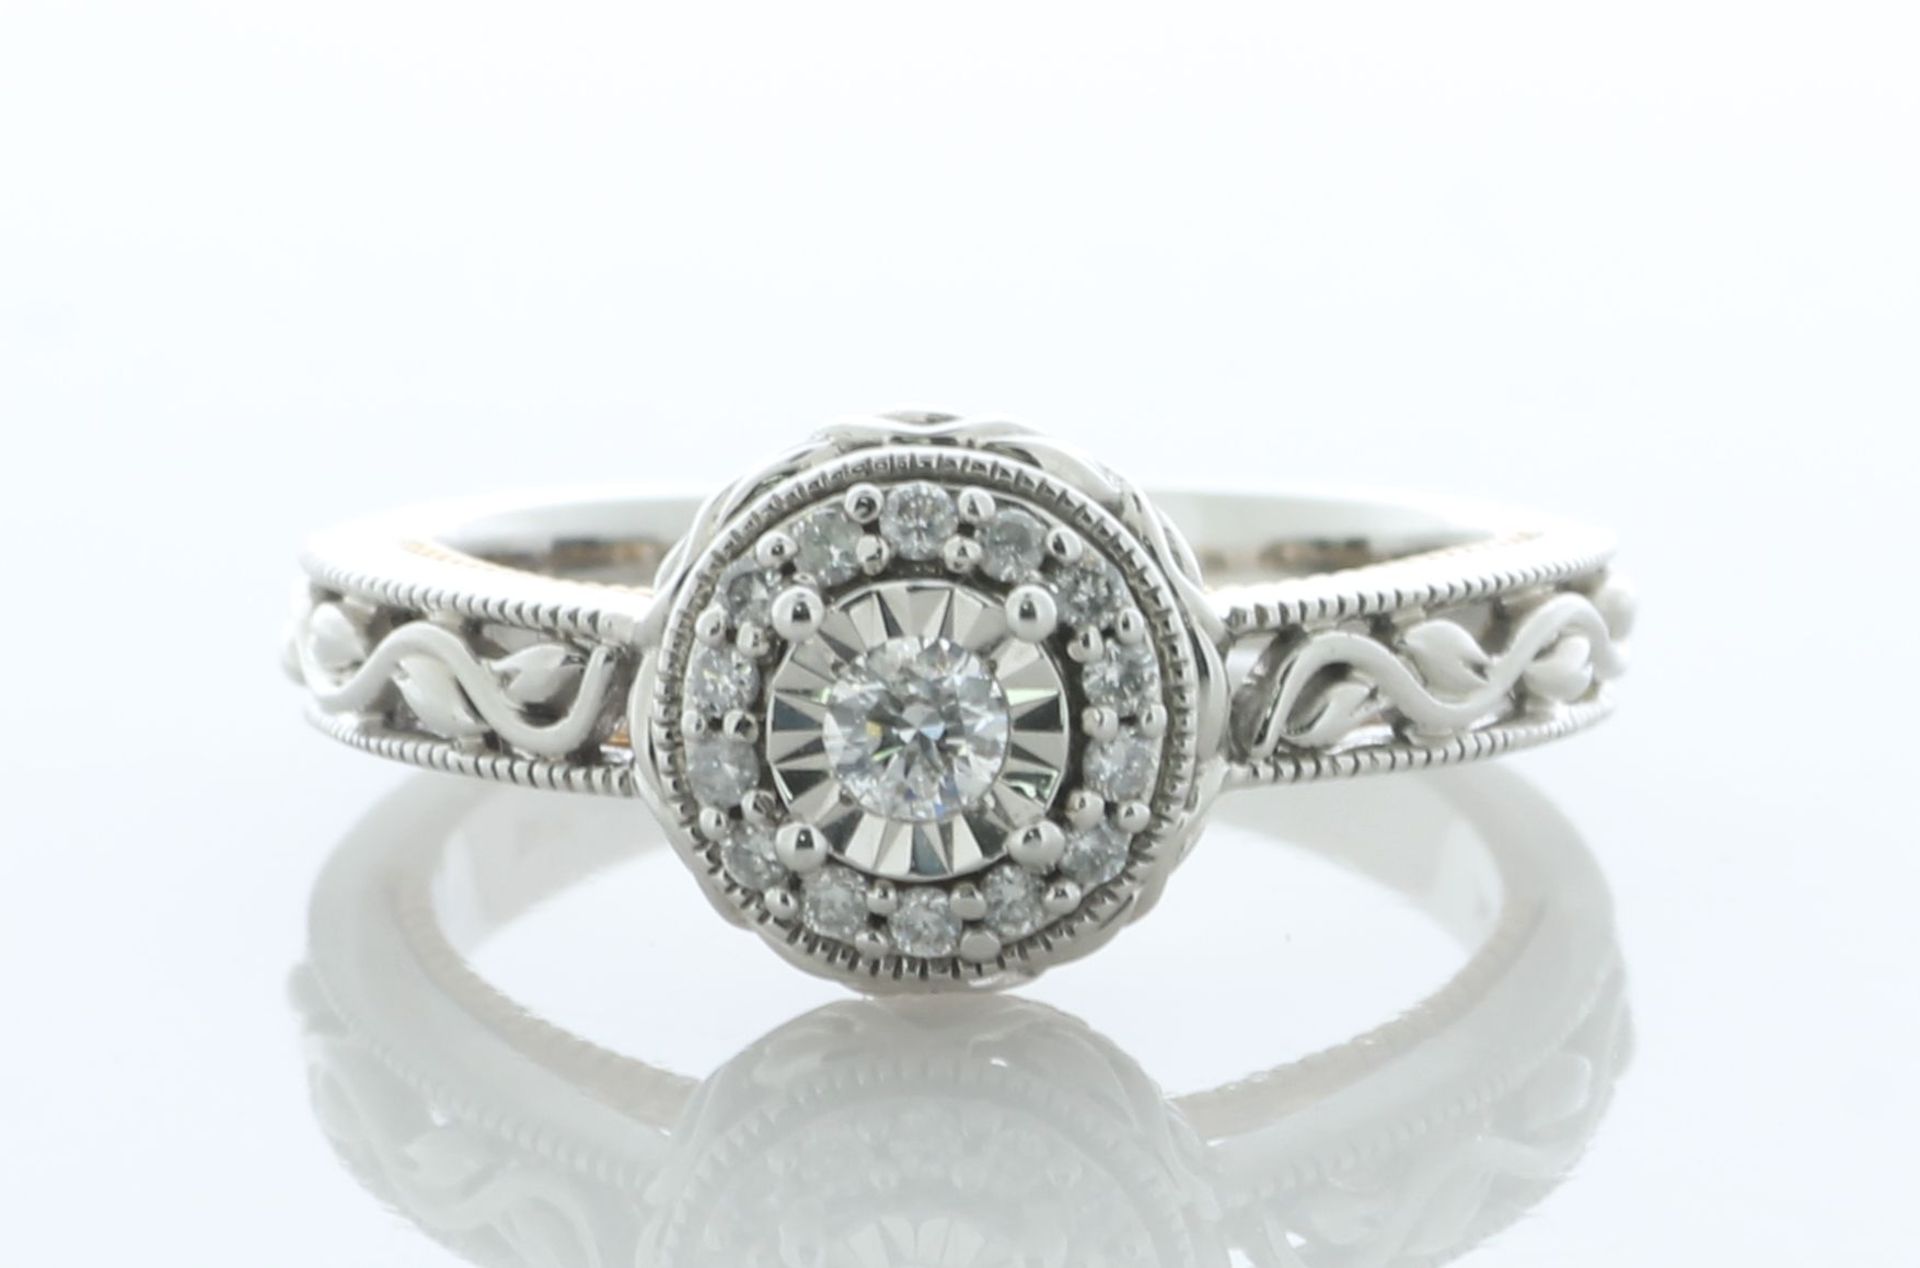 10ct White Gold Oval Cluster Claw Set Diamond Ring 0.20 Carats - Valued By IDI £3,695.00 - This